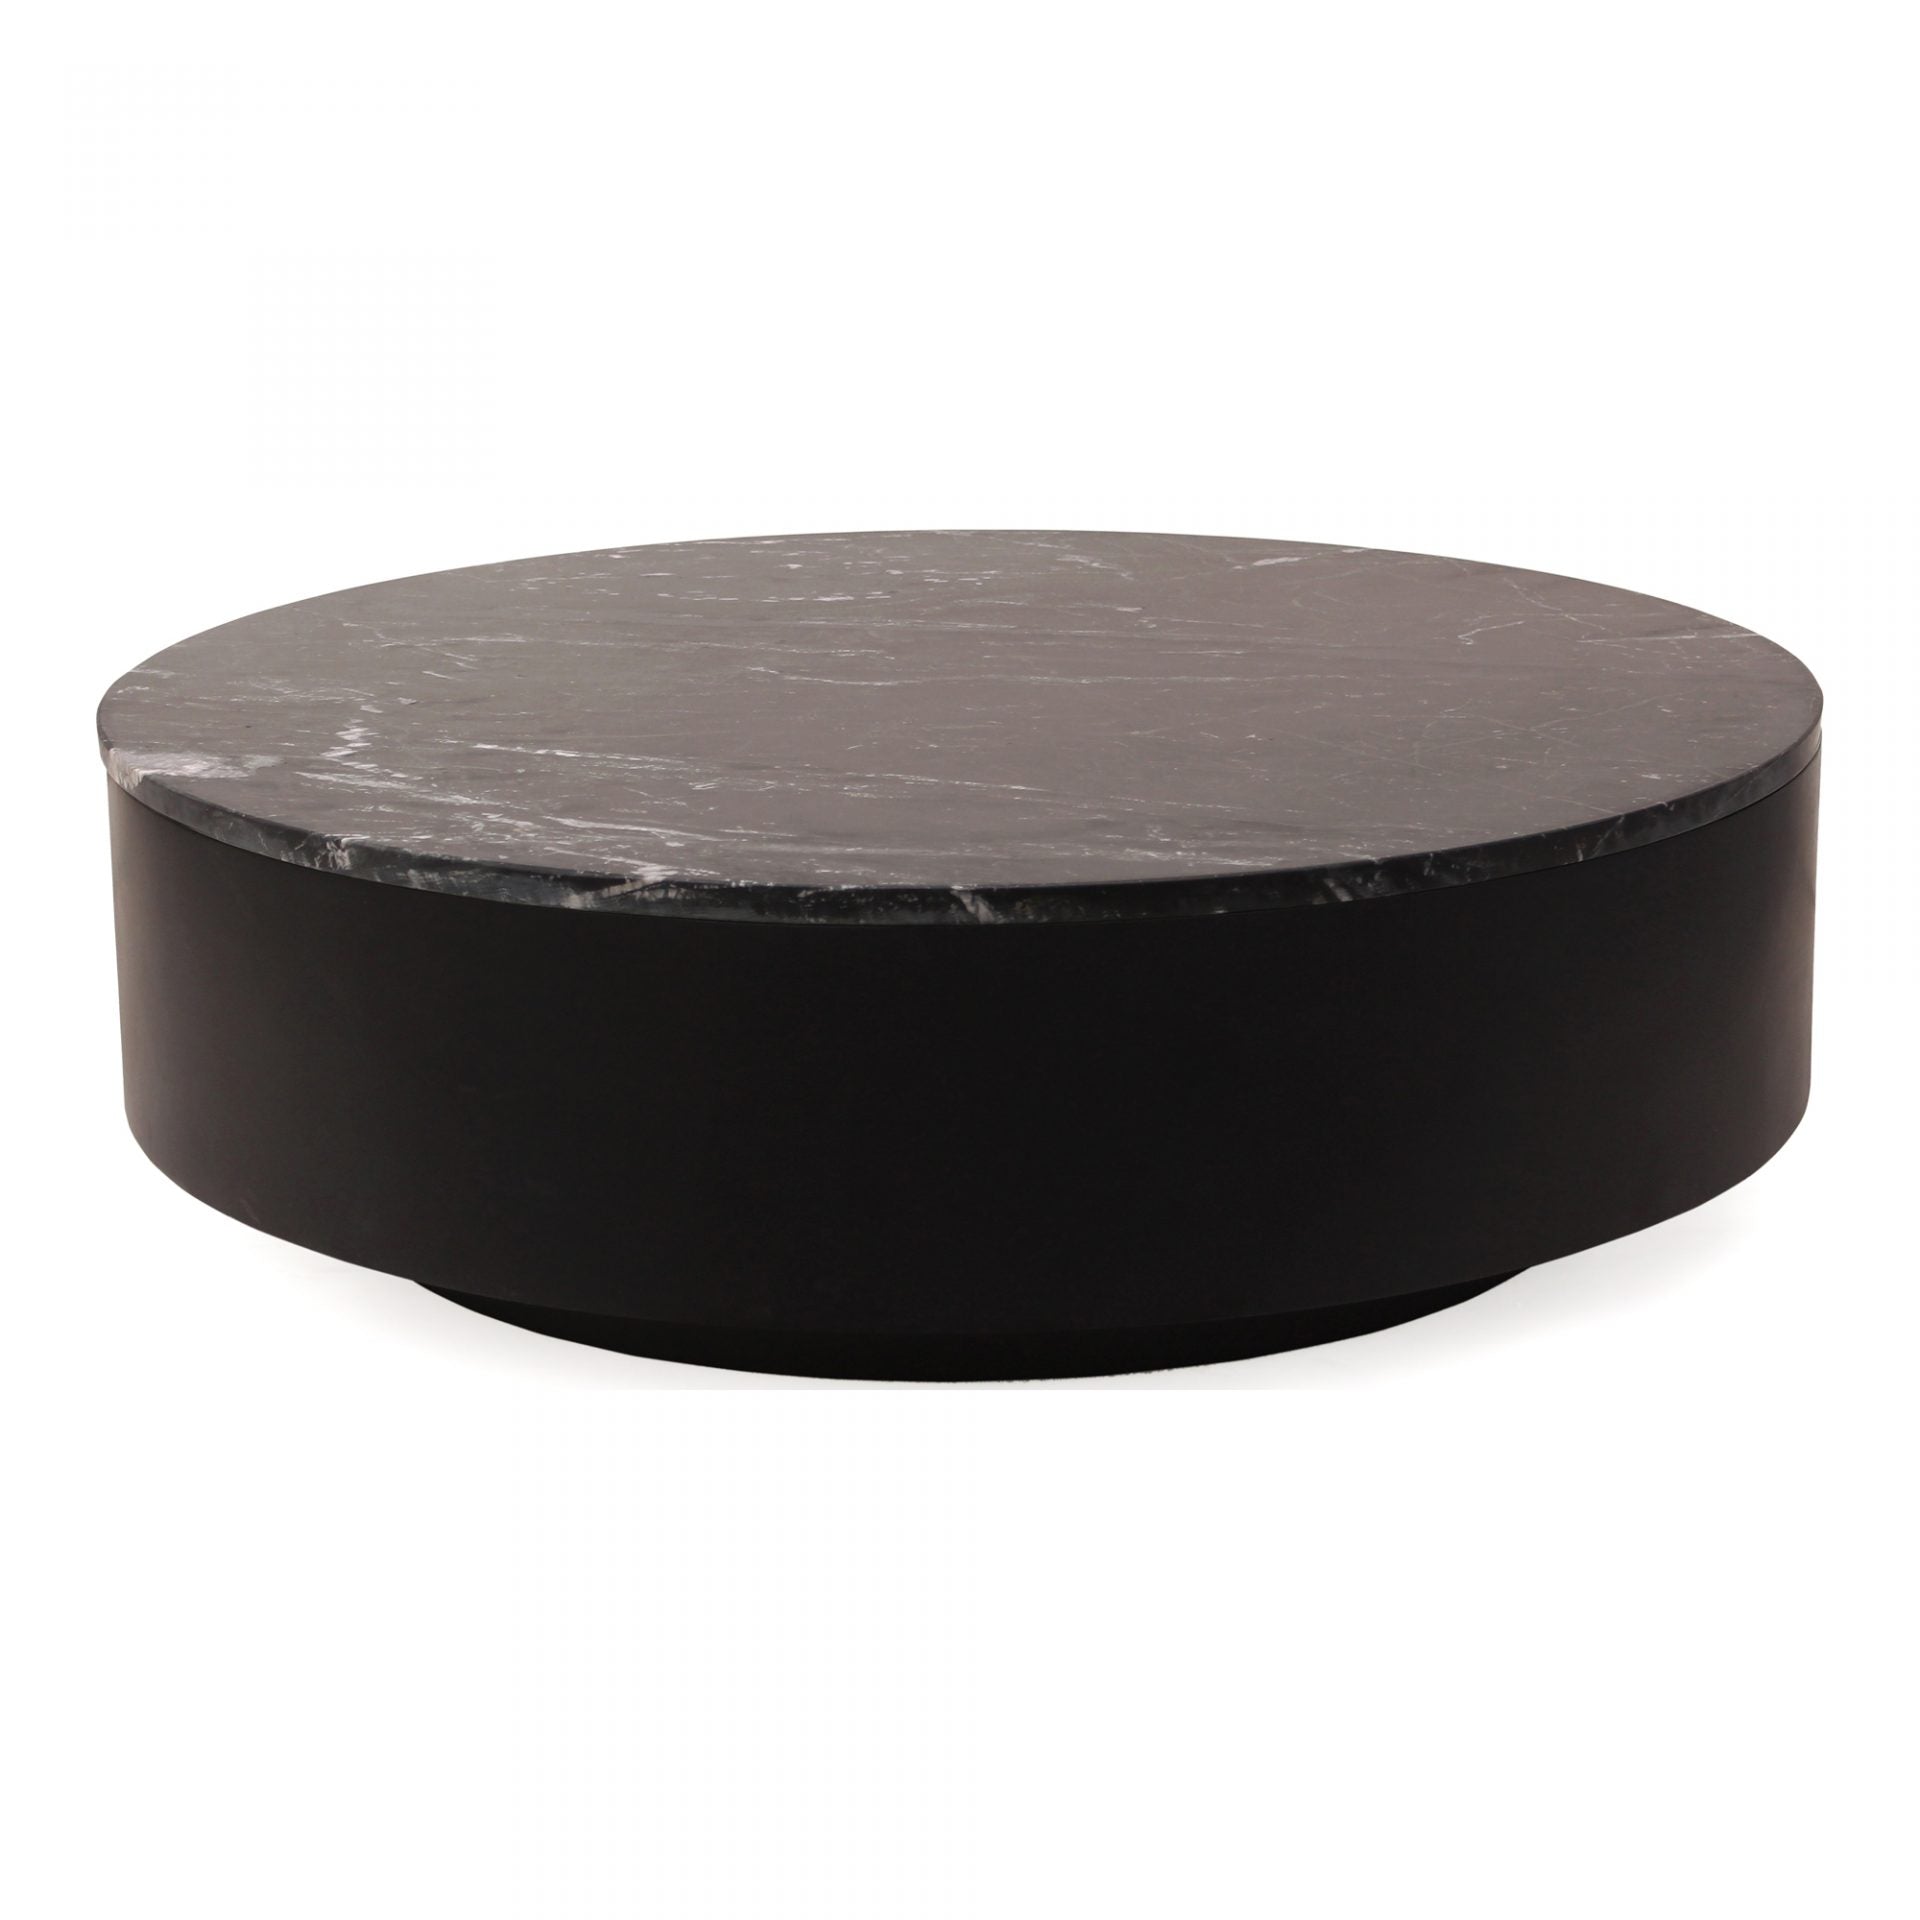 Elevate your space with this Ritual Coffee Table. The black marble brings a modern look to any living room or lounge area.   Dimensions: 40"W x 40"D x 12"H  Materials: Black Marble, MDF